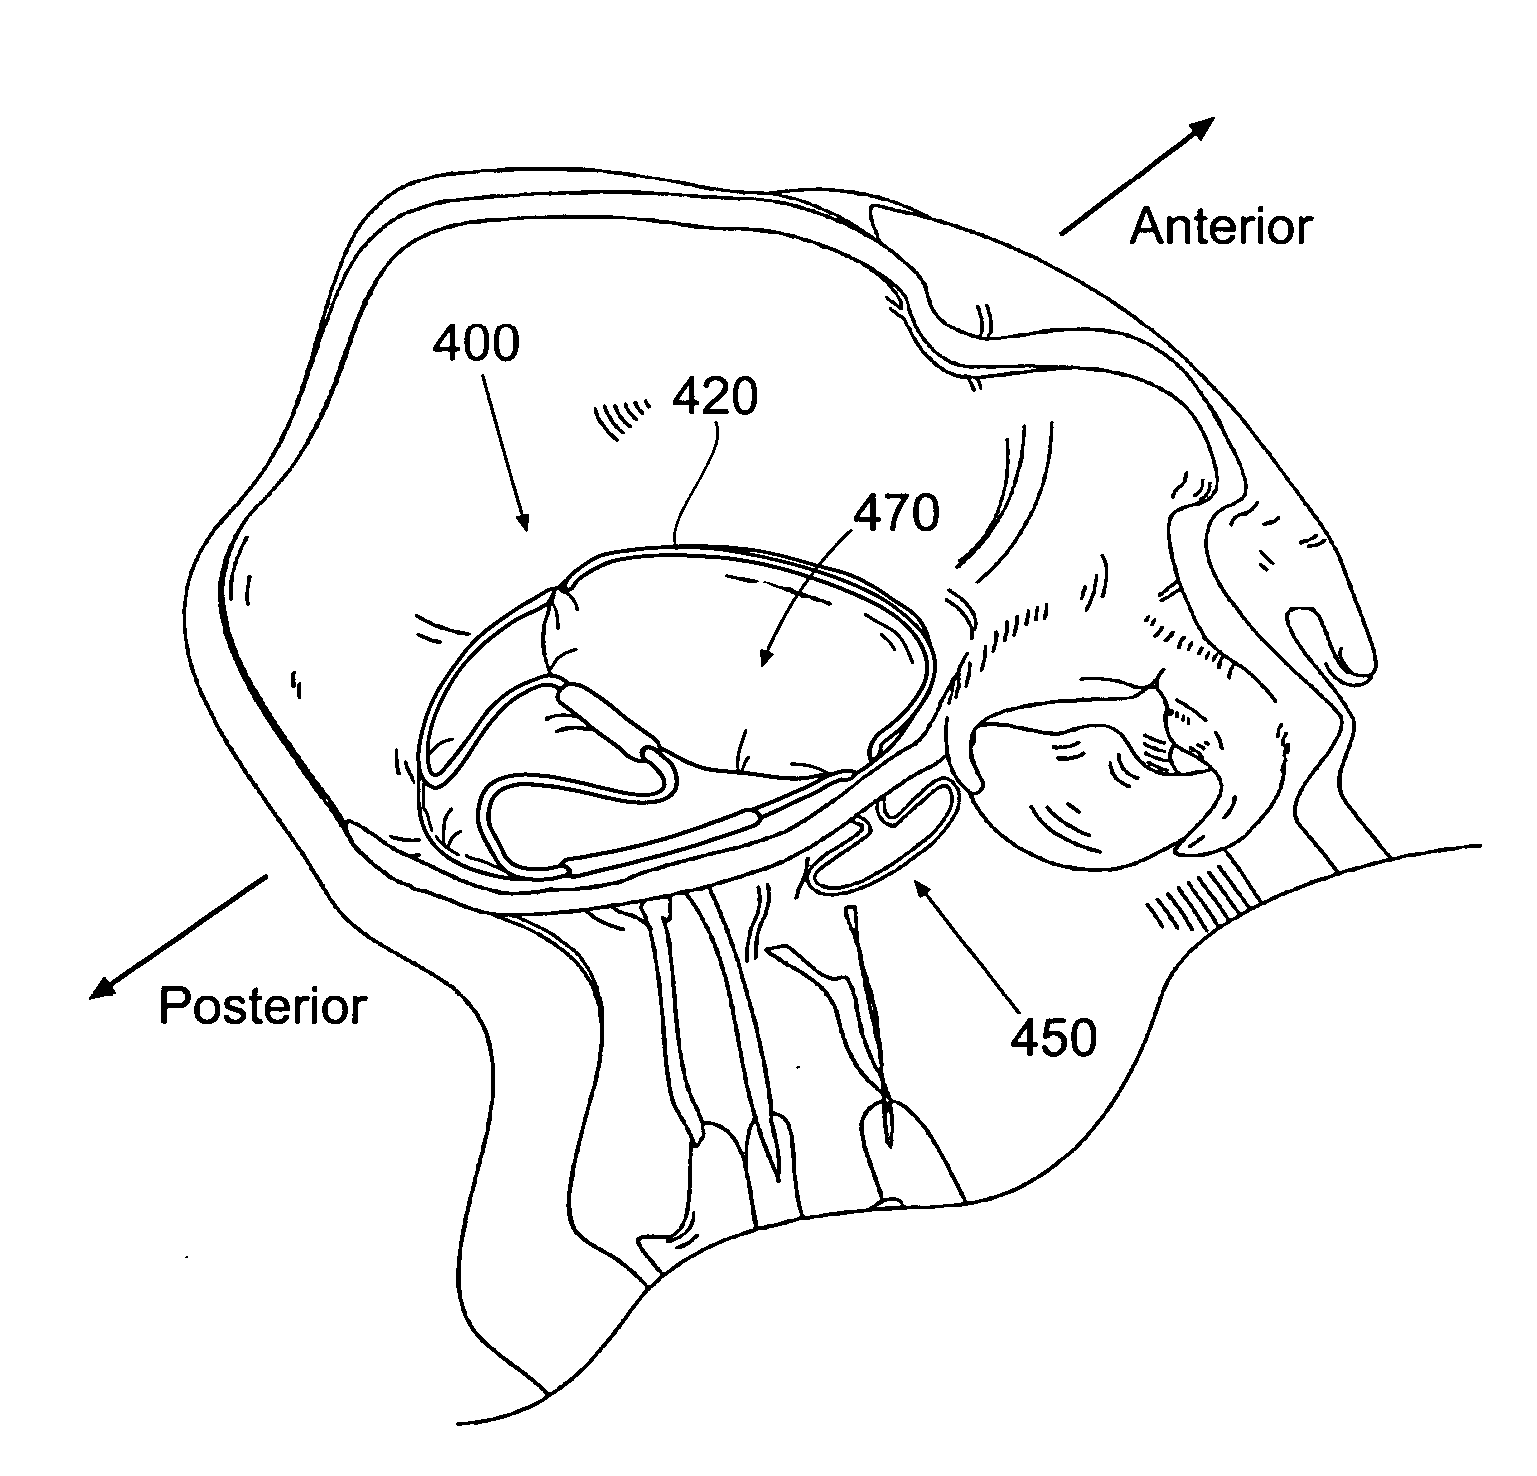 Devices, systems, and methods for supplementing, repairing, or replacing a native heart valve leaflet